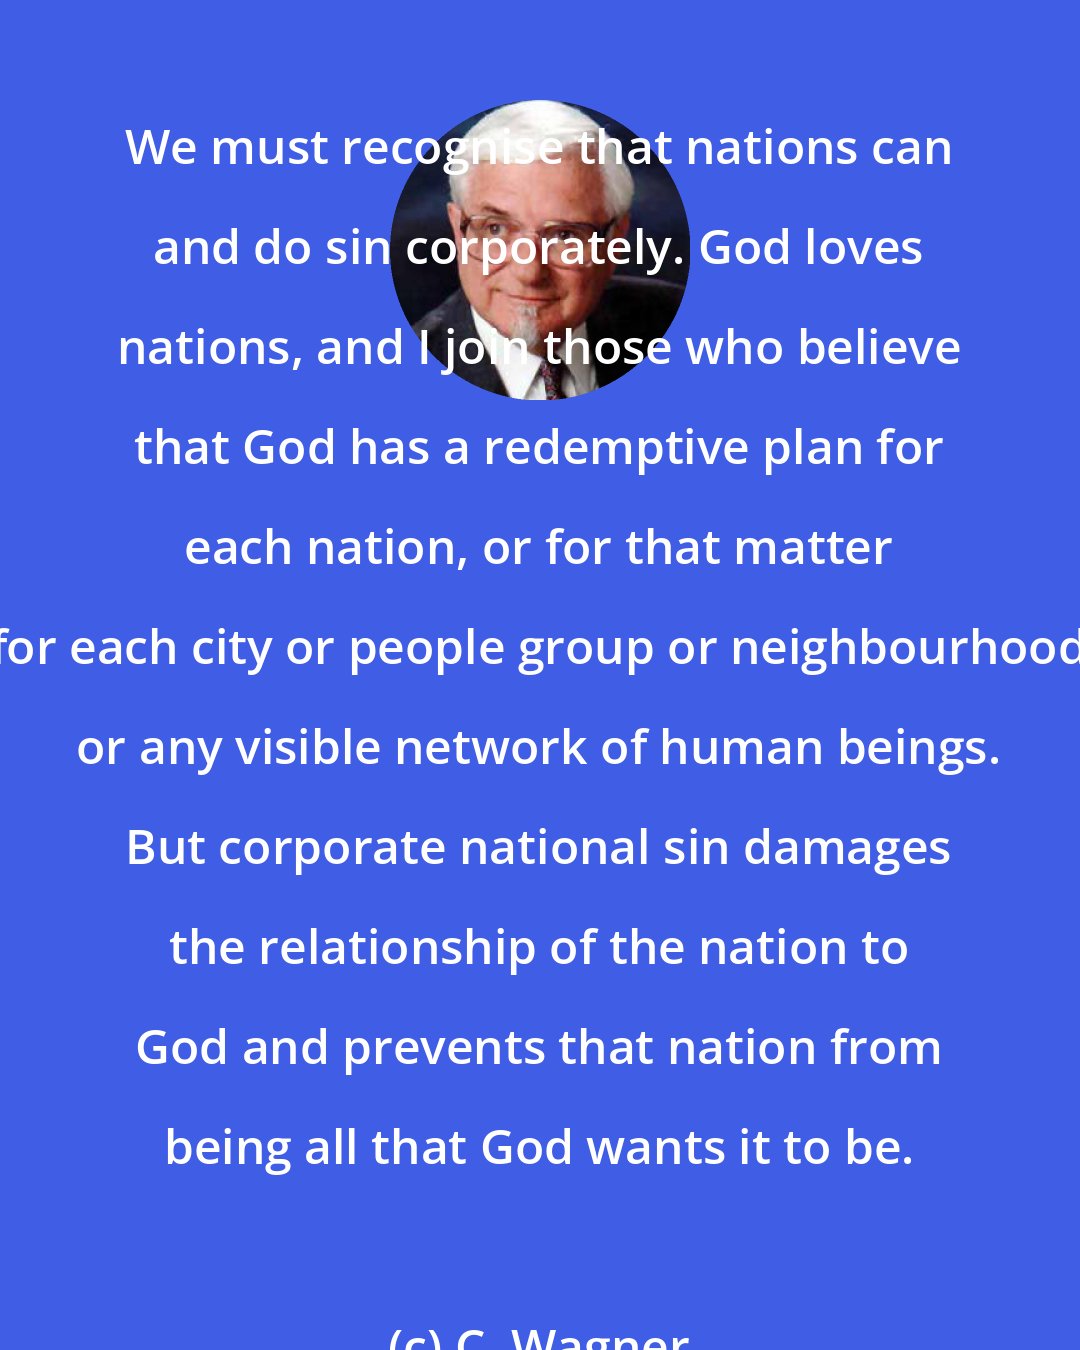 C. Wagner: We must recognise that nations can and do sin corporately. God loves nations, and I join those who believe that God has a redemptive plan for each nation, or for that matter for each city or people group or neighbourhood or any visible network of human beings. But corporate national sin damages the relationship of the nation to God and prevents that nation from being all that God wants it to be.